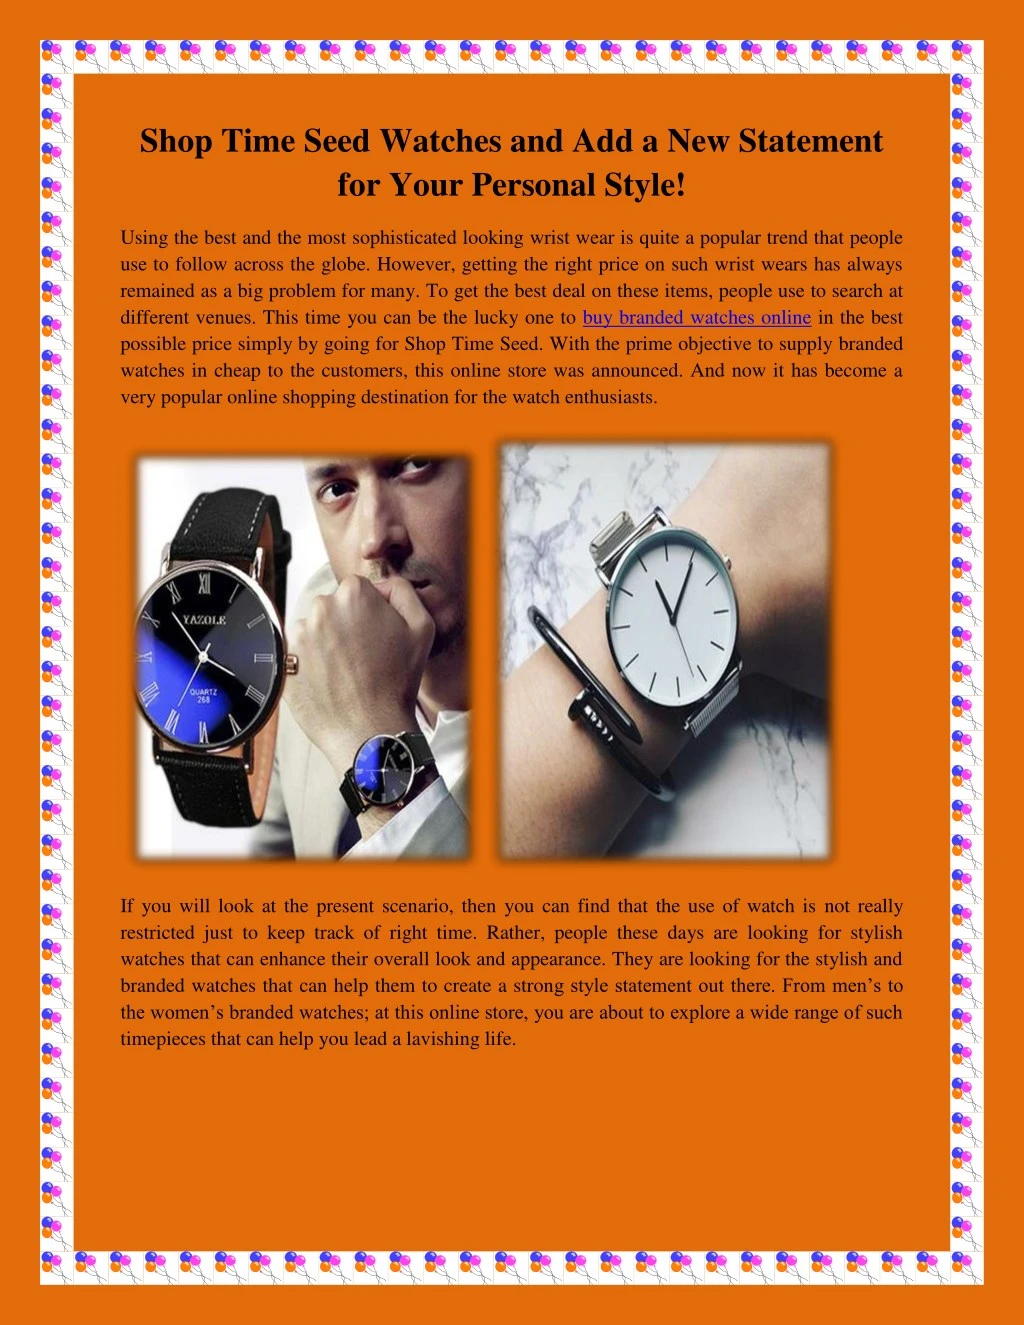 shop time seed watches and add a new statement